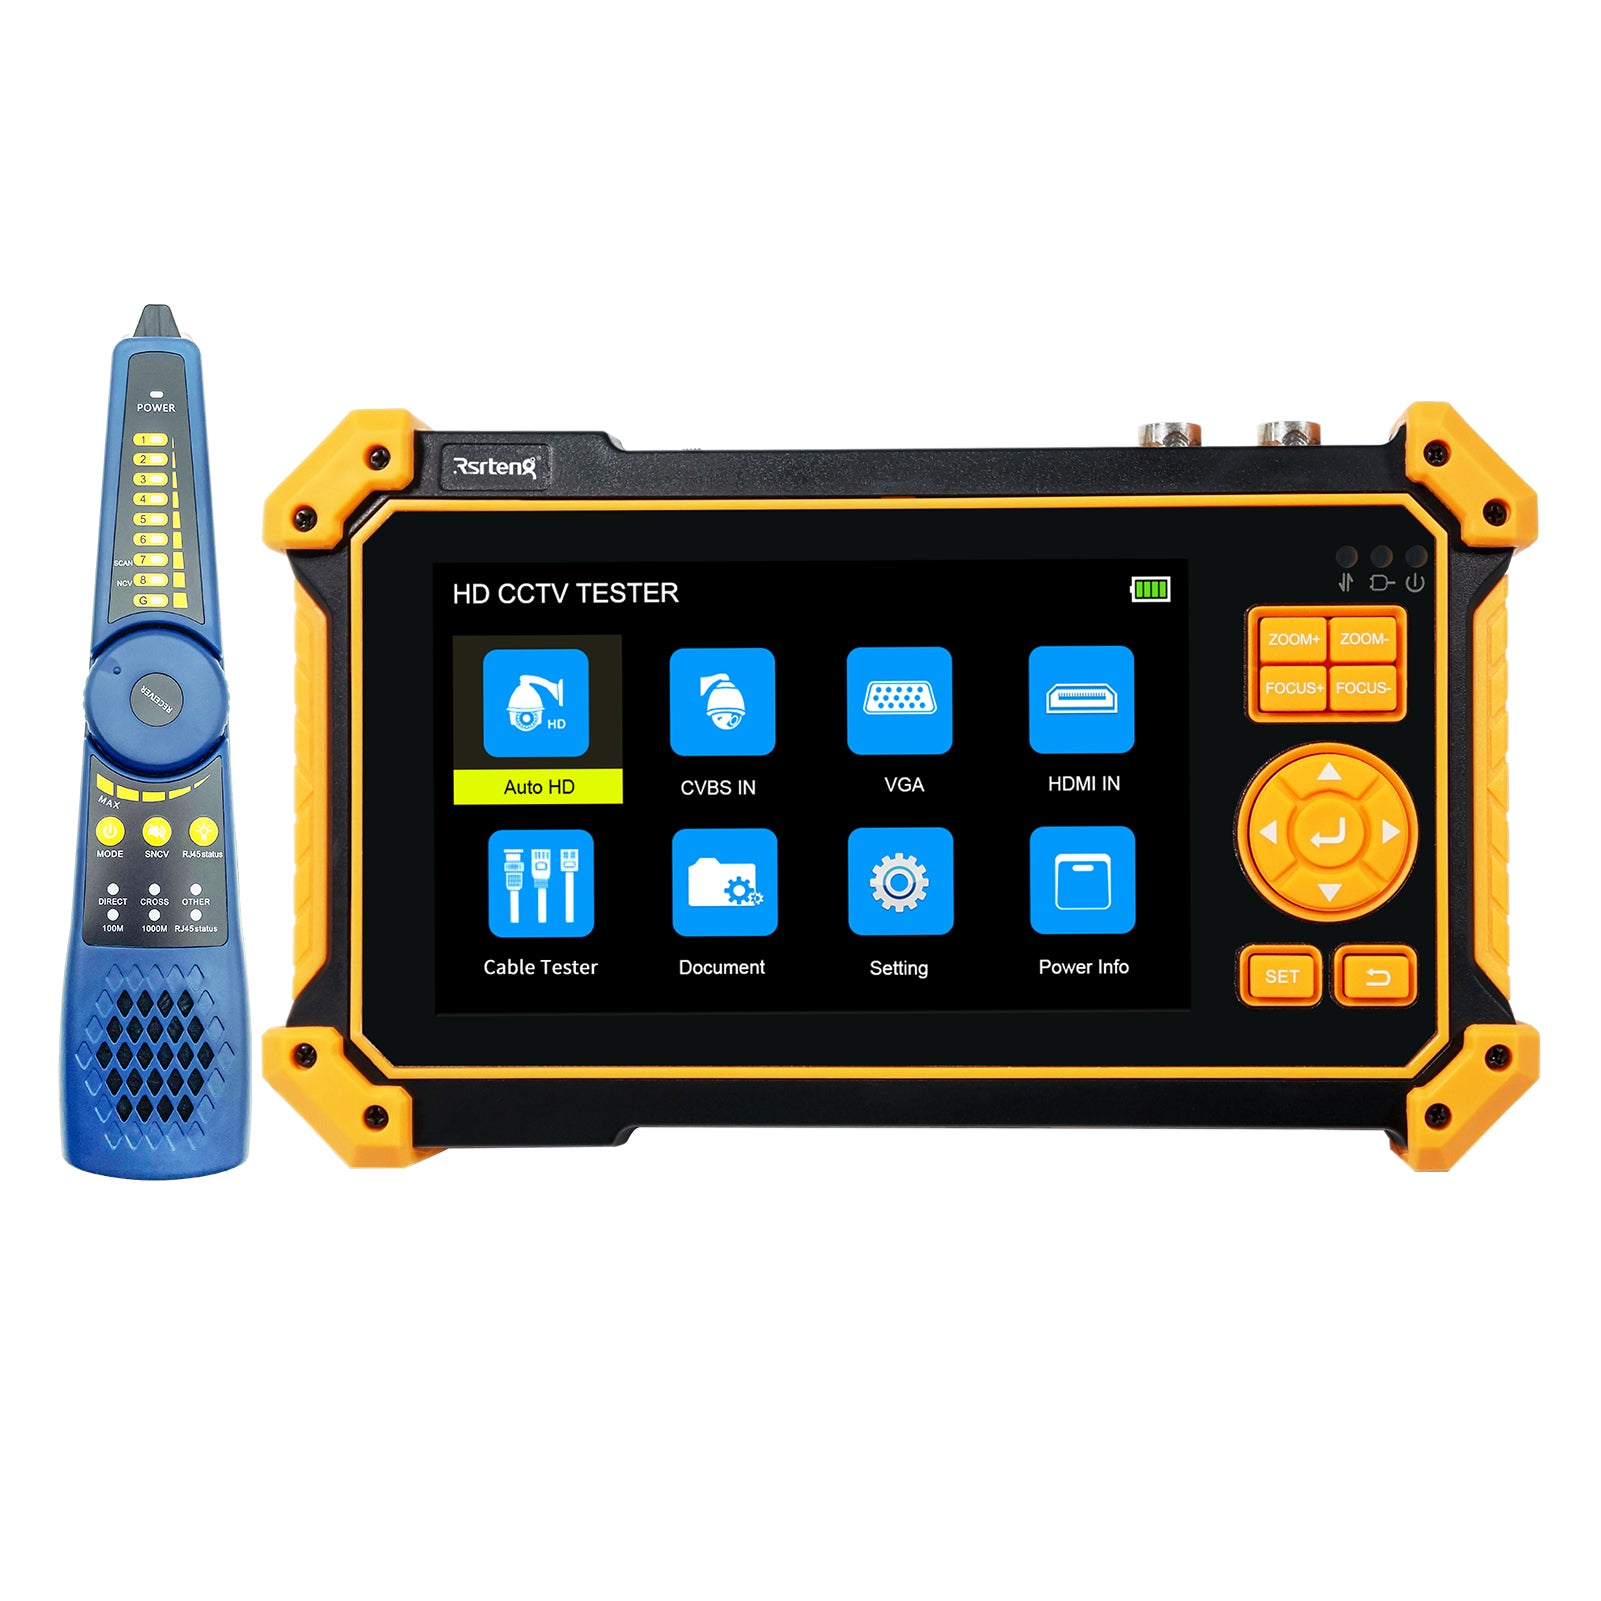 HD-3200C Plus Coaxial Security Camera Tester